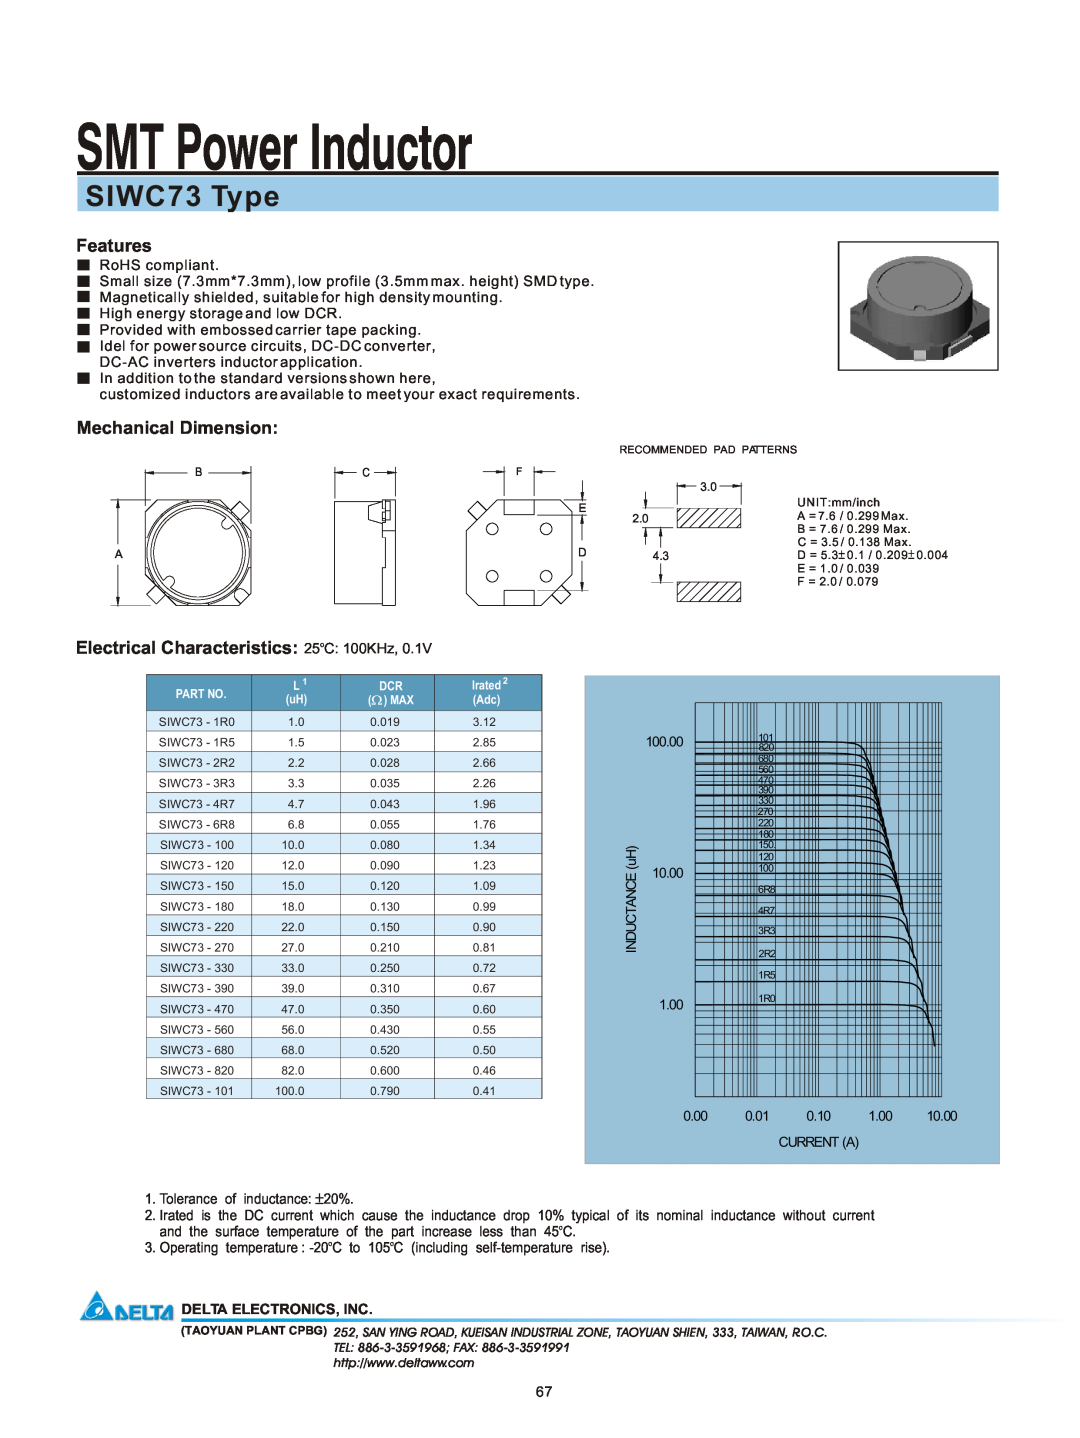 Delta Electronics manual SMT Power Inductor, SIWC73 Type, Features, Mechanical Dimension, Delta Electronics, Inc 